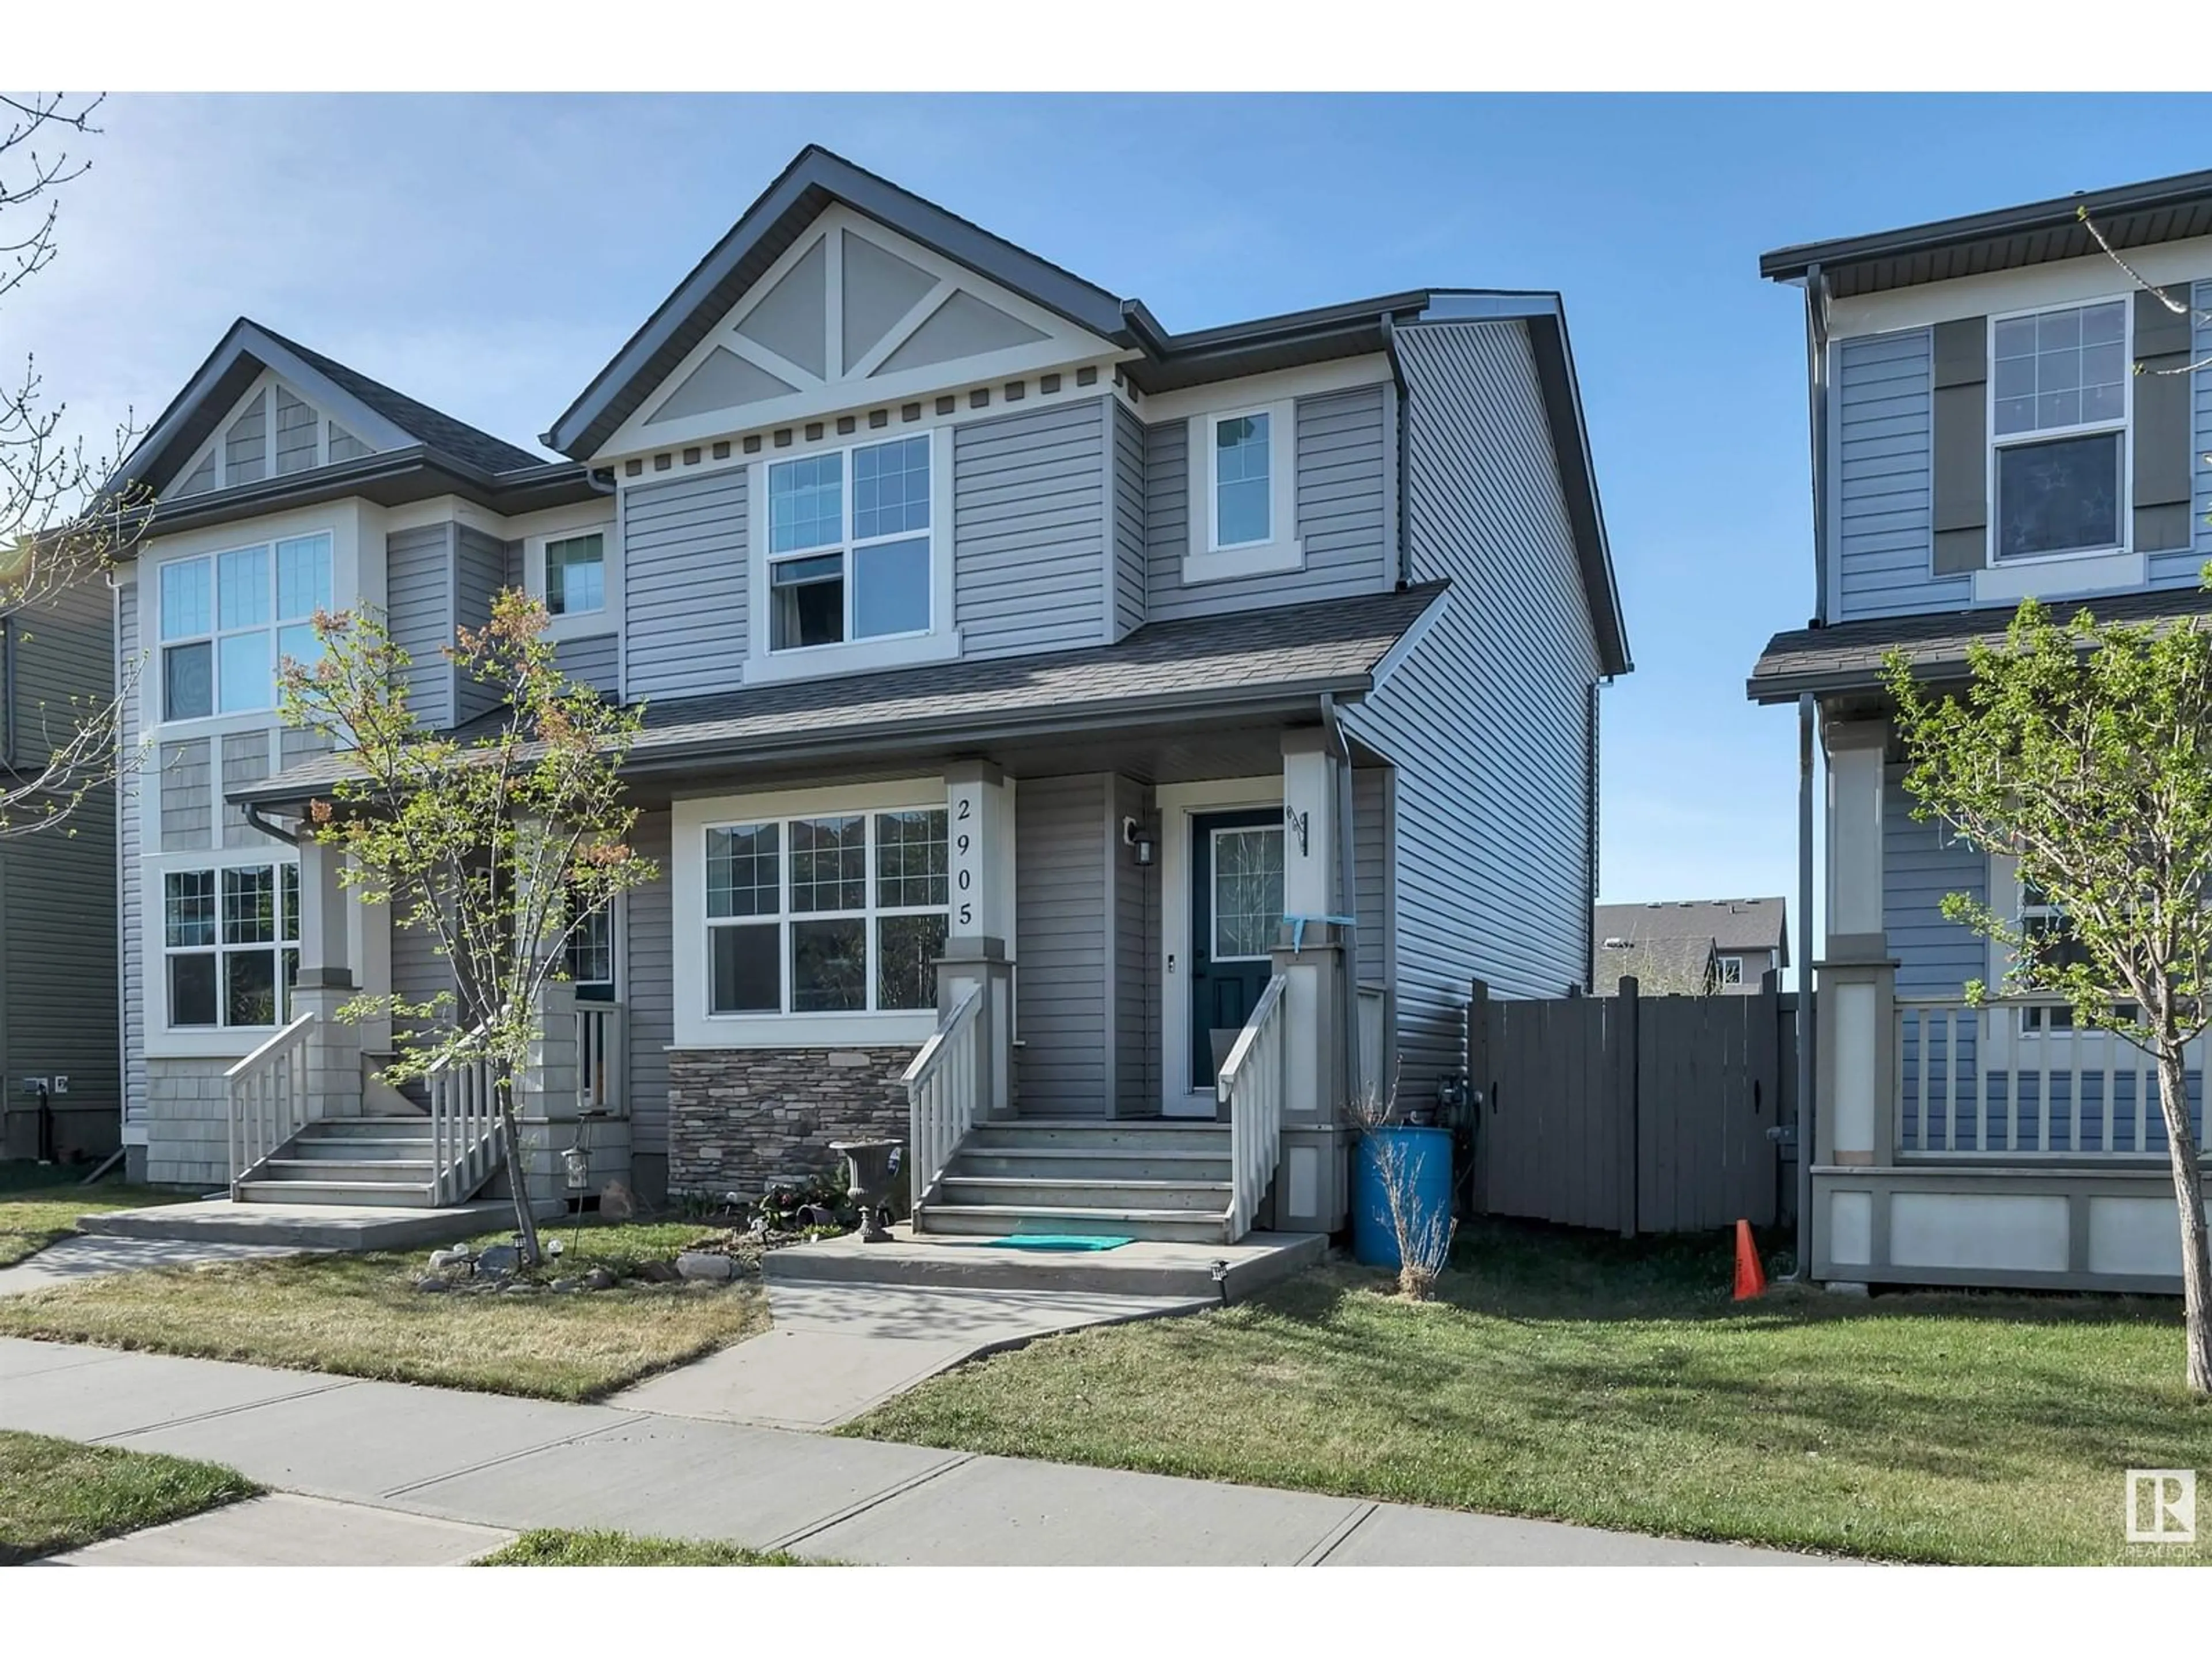 A pic from exterior of the house or condo for 2905 19 AV NW, Edmonton Alberta T6T0N6